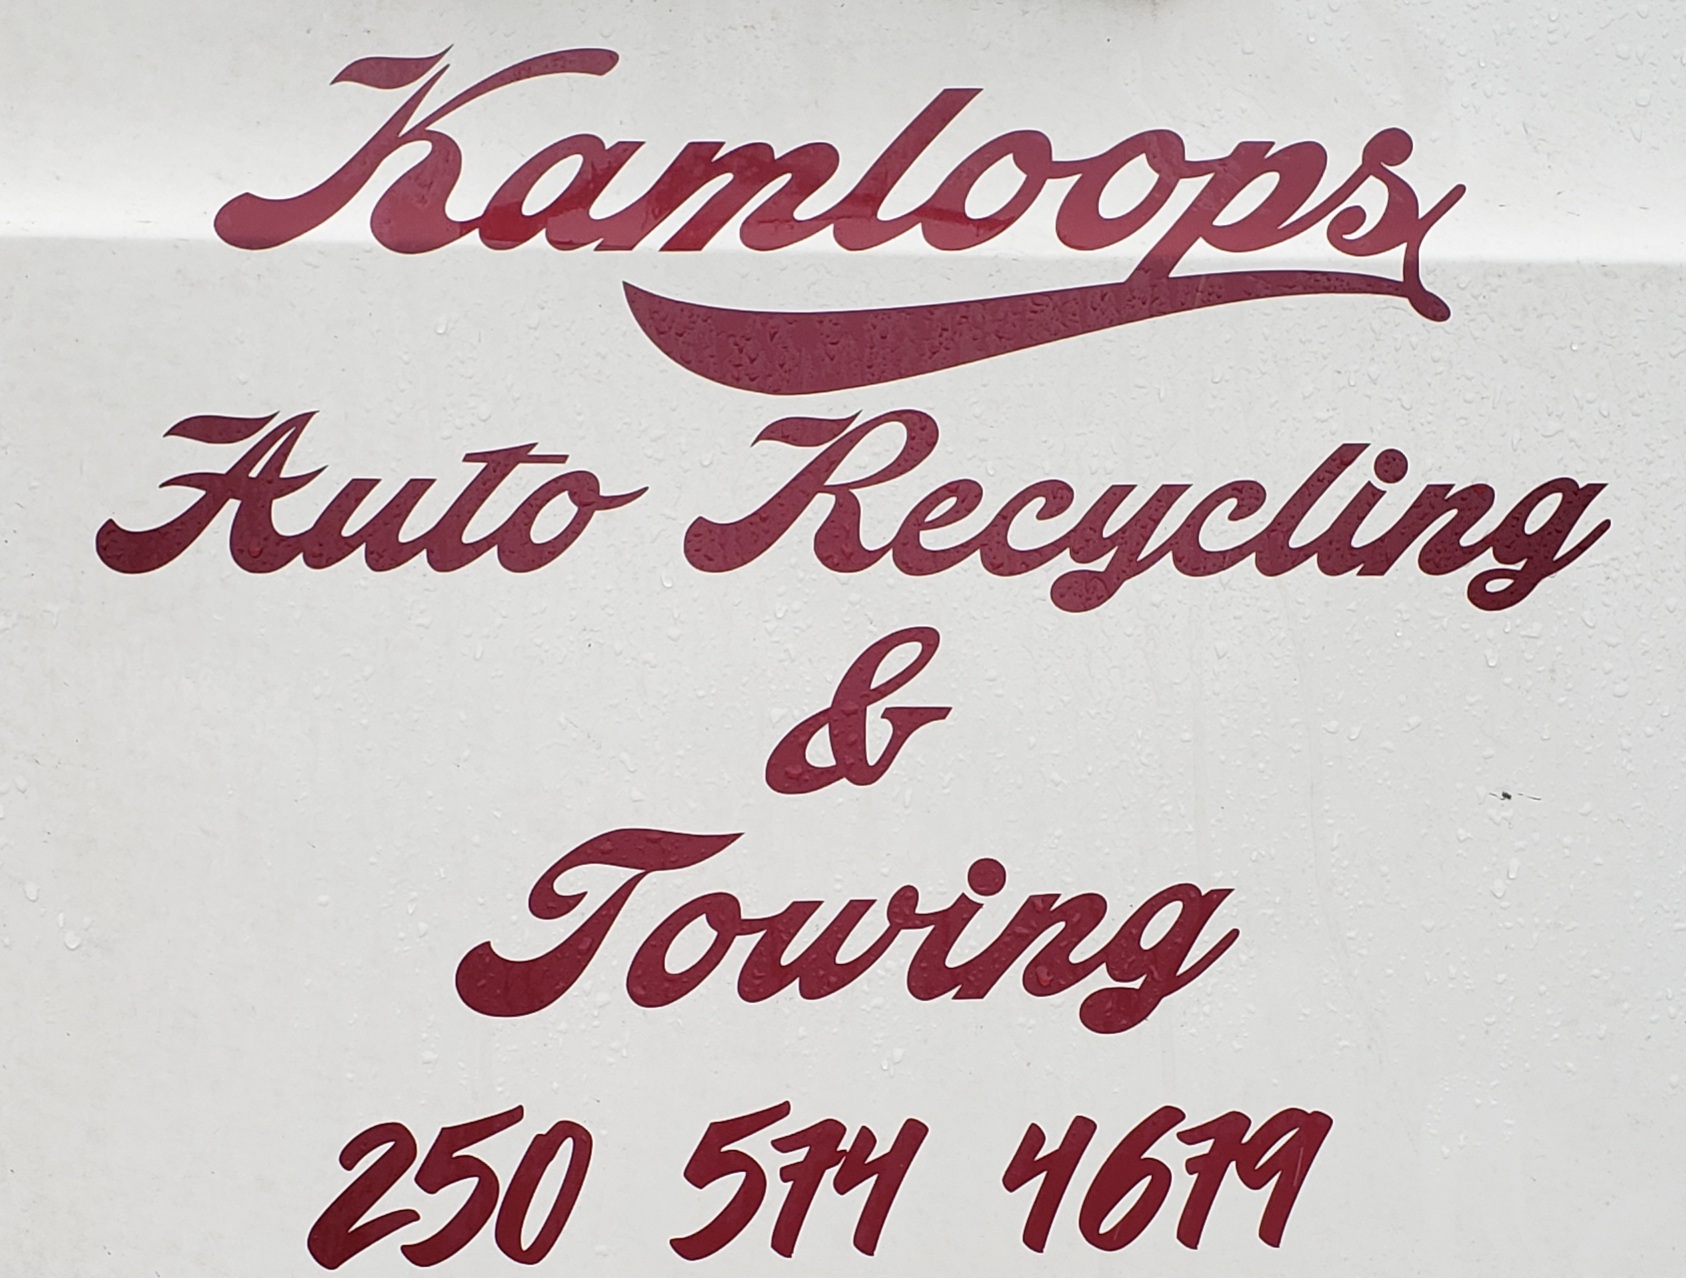 Kamloops Auto Recycling & Towing